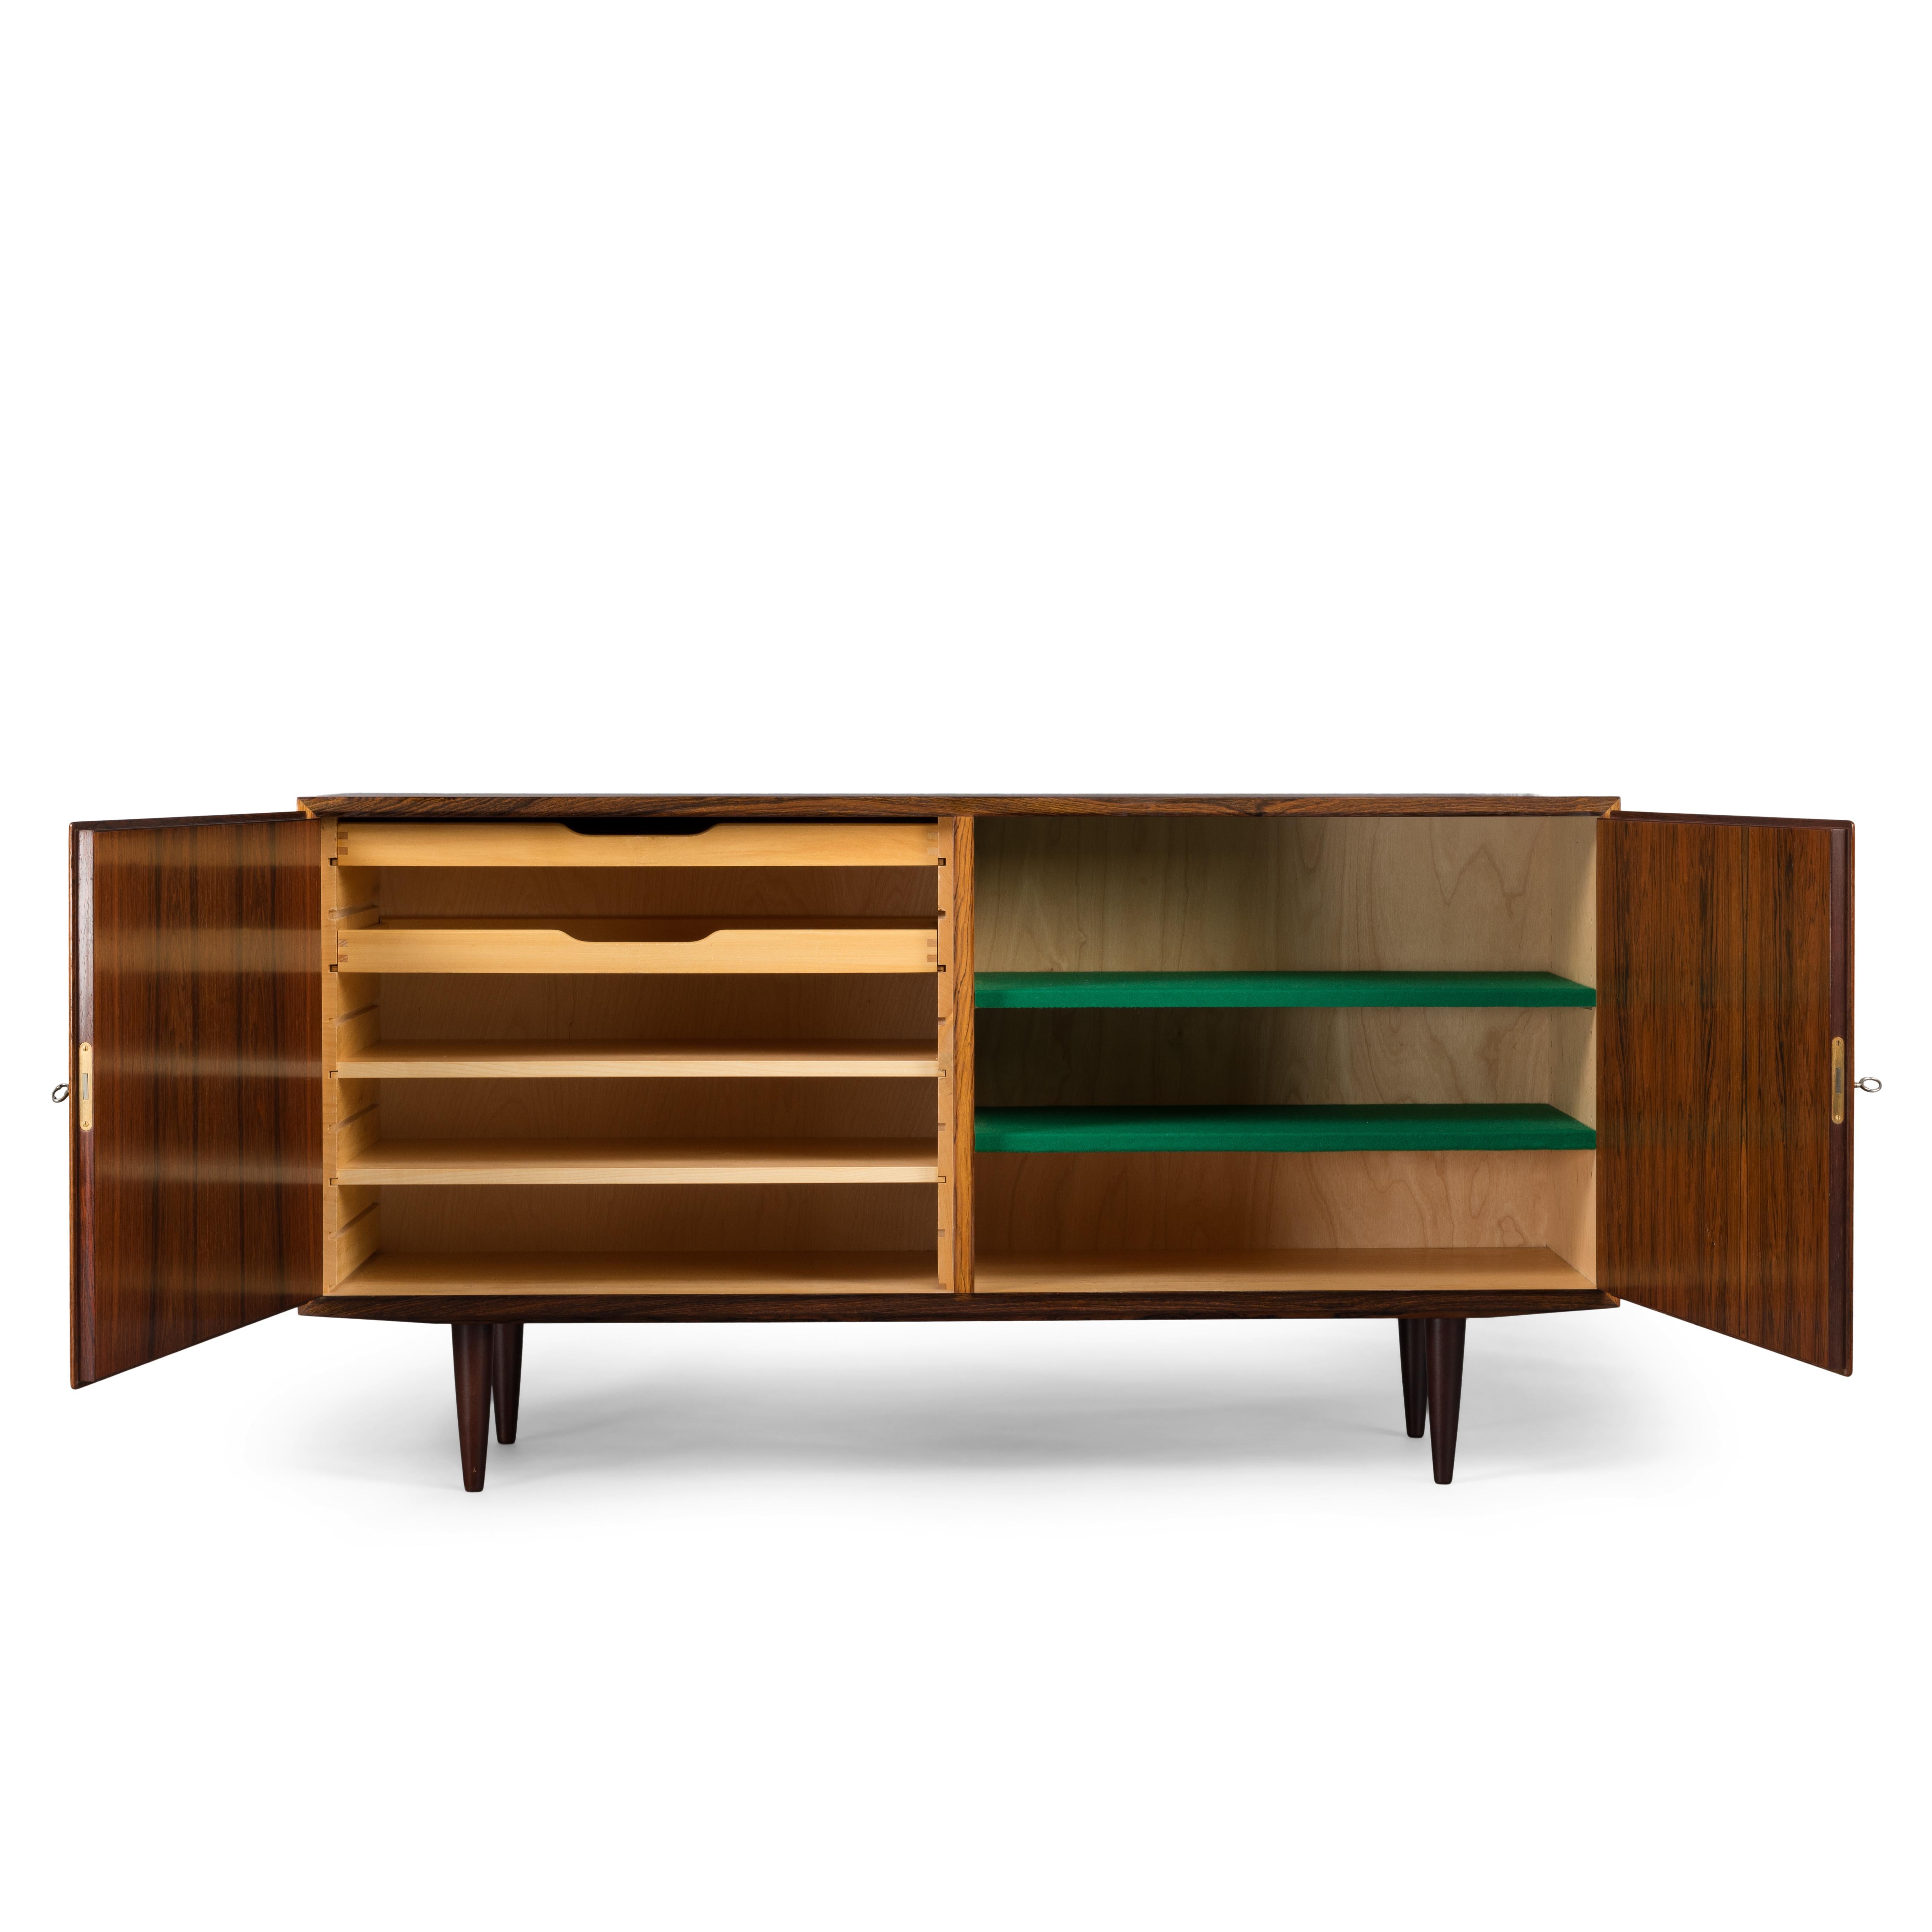 Designed by Carlo Jensen and made by Hundevad & Co. This side board is truly a Classic design. Finished in a beautiful veneer this cabinet comes with great construction finesse and quality. There are height adjustable drawers on the left hand side